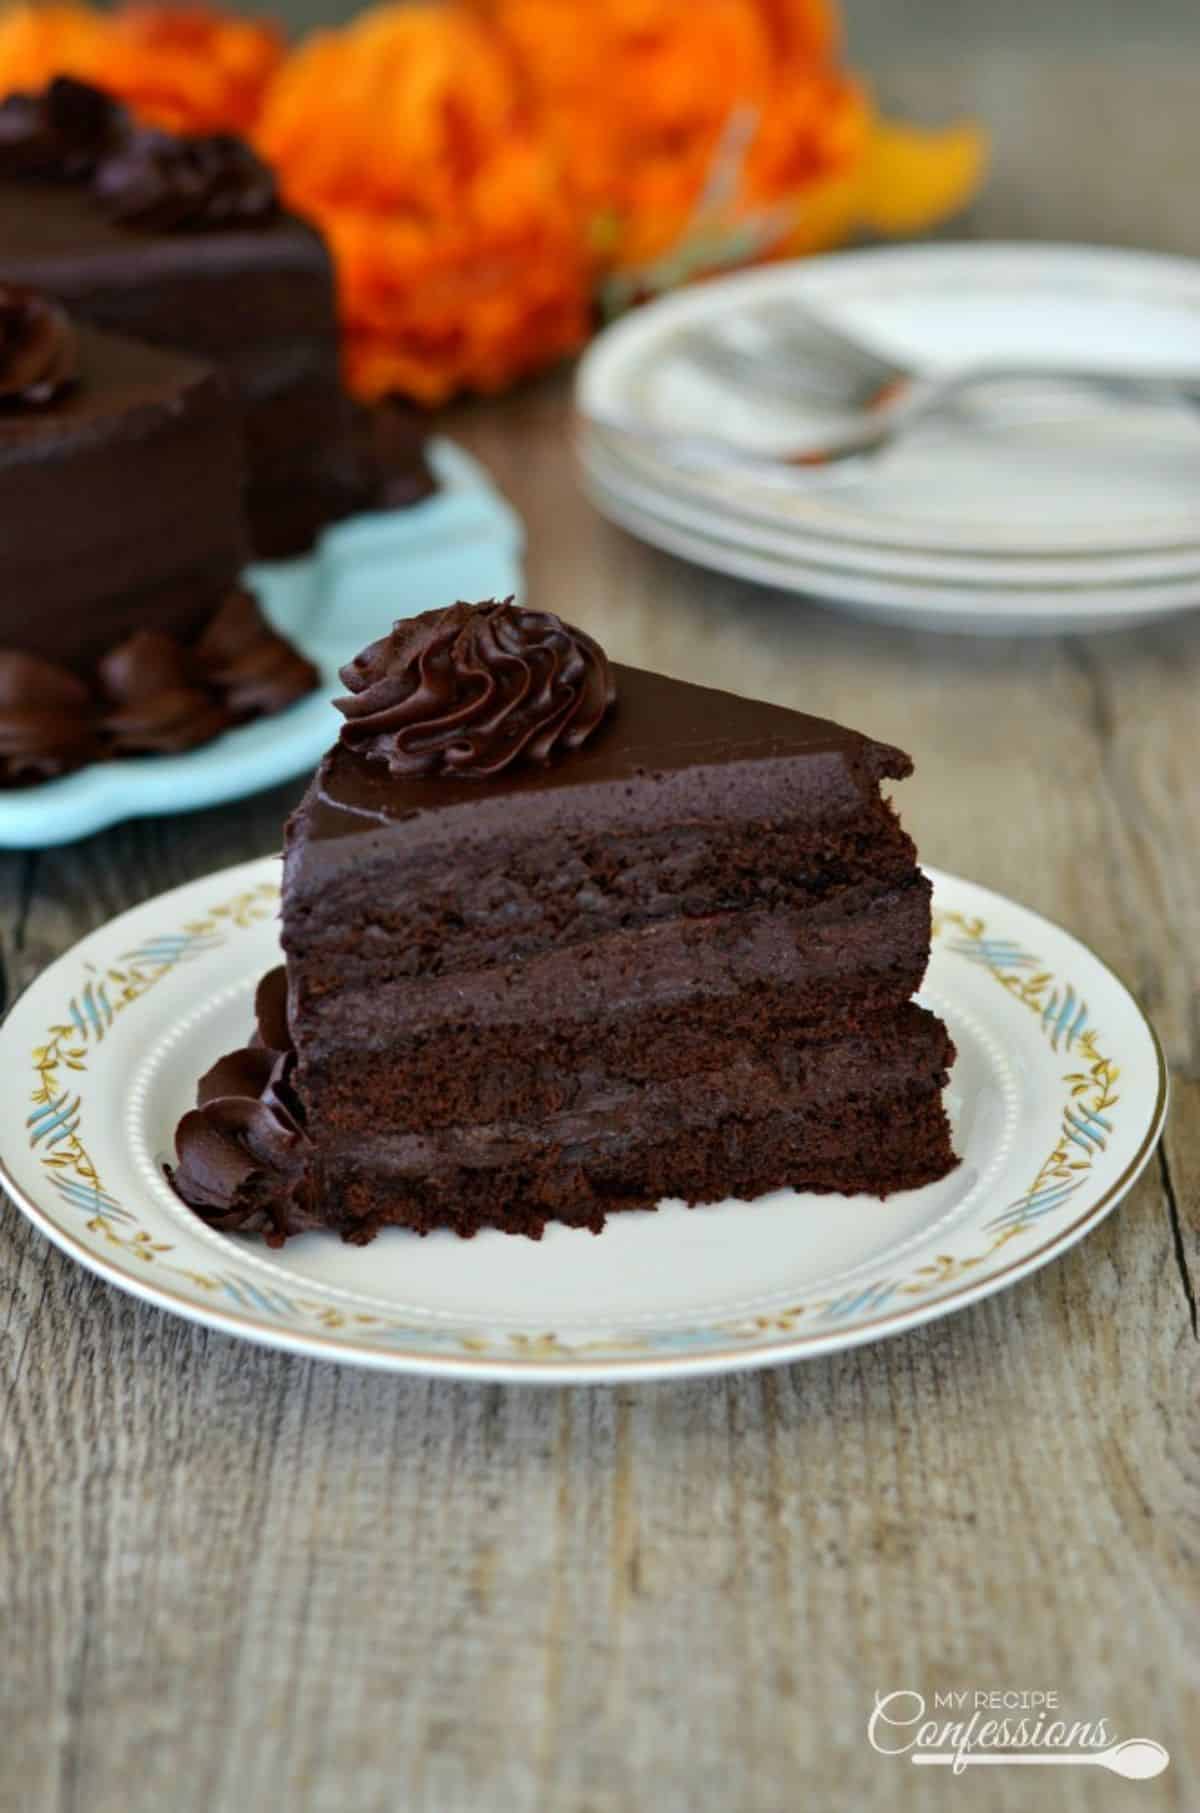 A piece of ultimate chocolate cake on a plate.